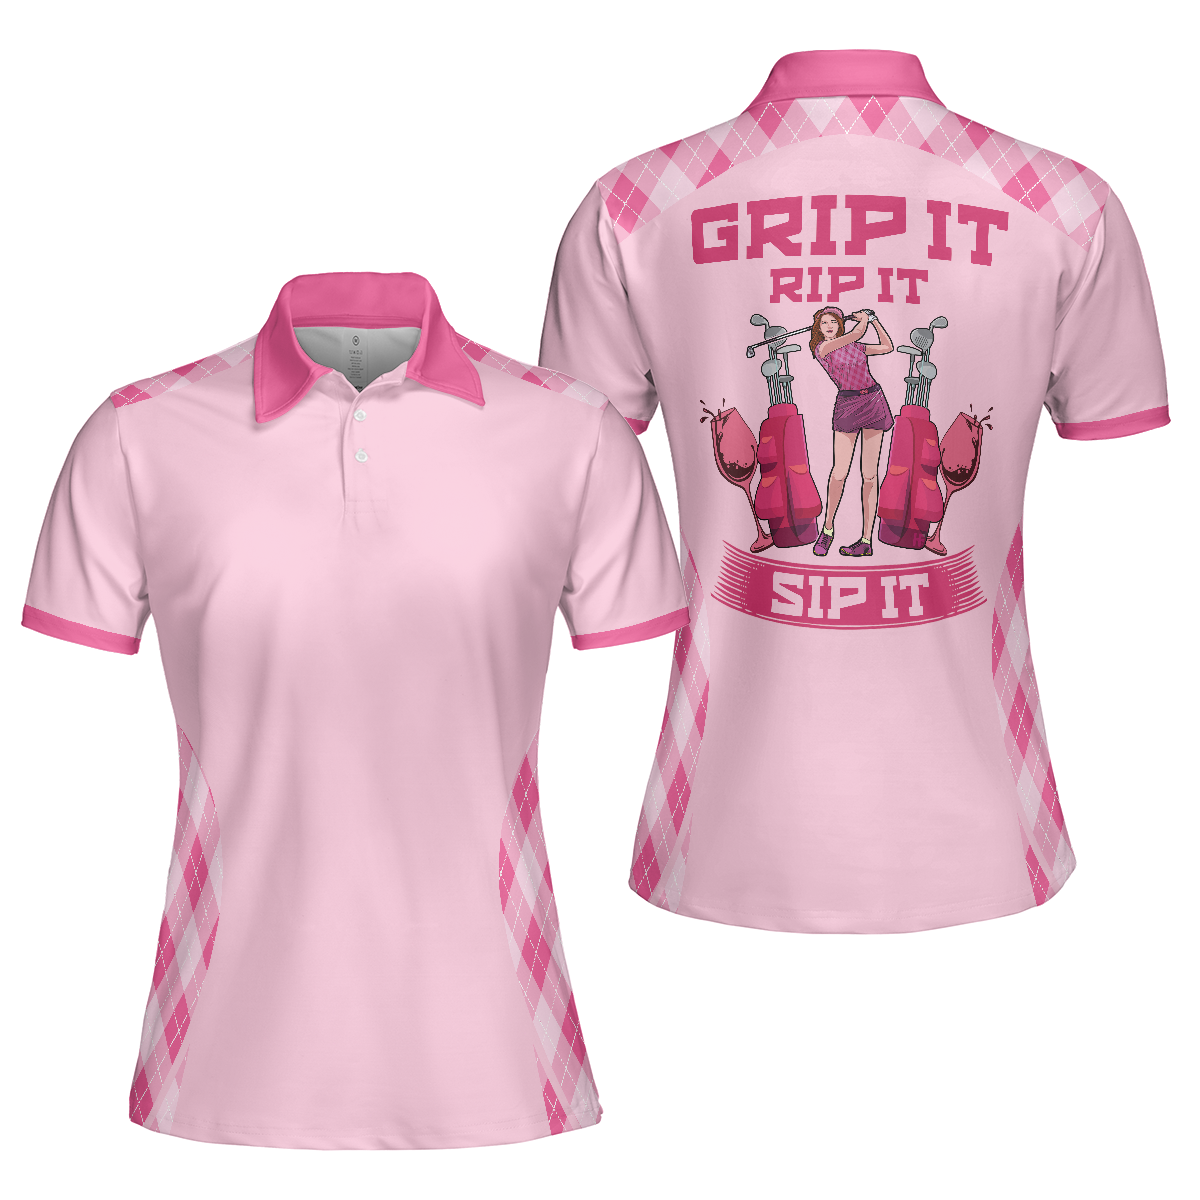 Golf Women Polo Shirt, Grip It Rip It Sip It, Pink Argyle Pattern Women Polo Shirts, Best Golfing Gift For Female Golfers, Ladies, Golf Lovers